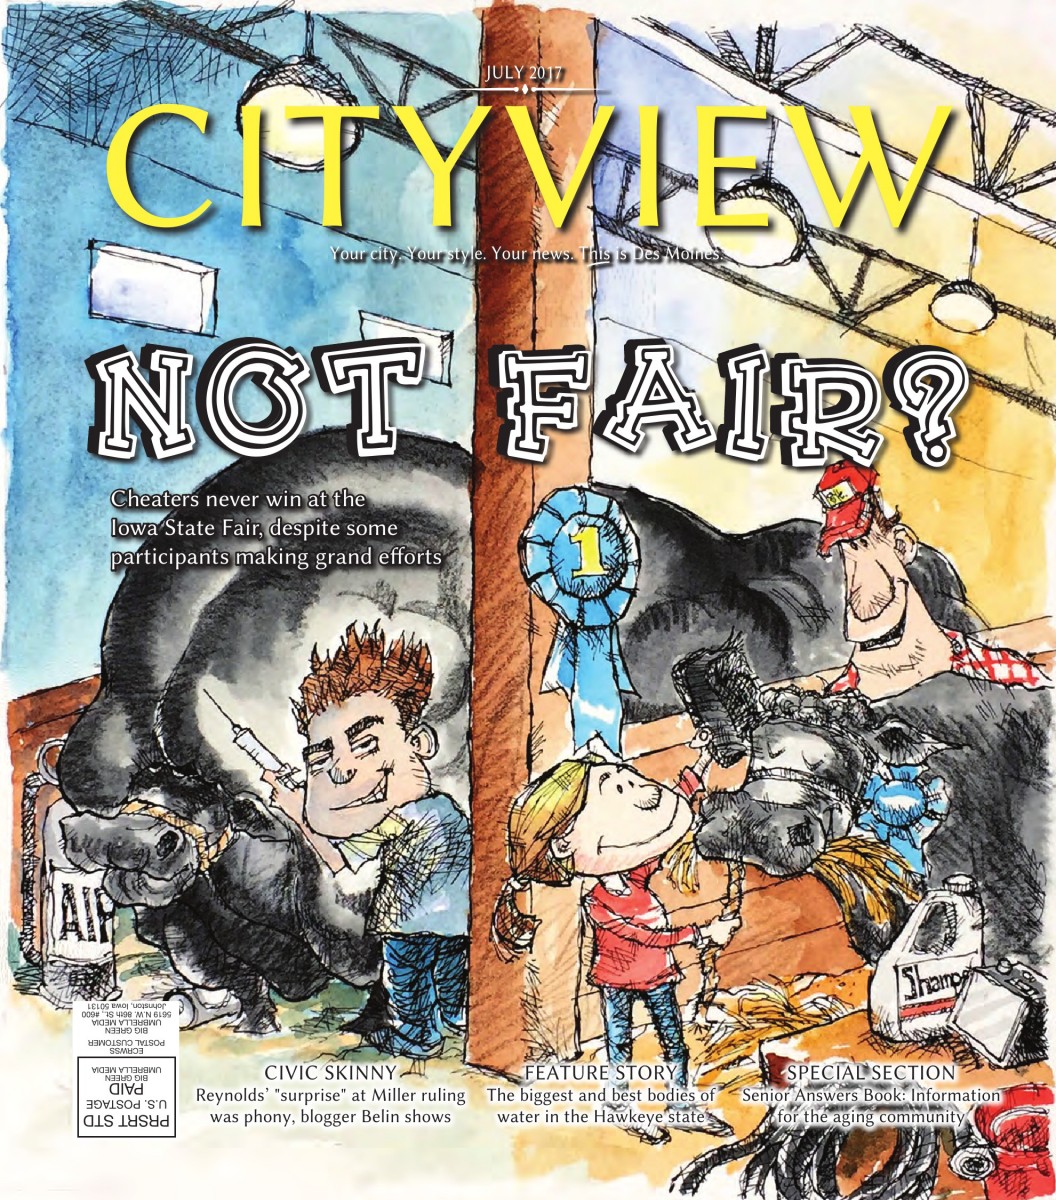 http://www.dmcityview.com/CityviewJuly2017/files/pages/tablet/1.jpg